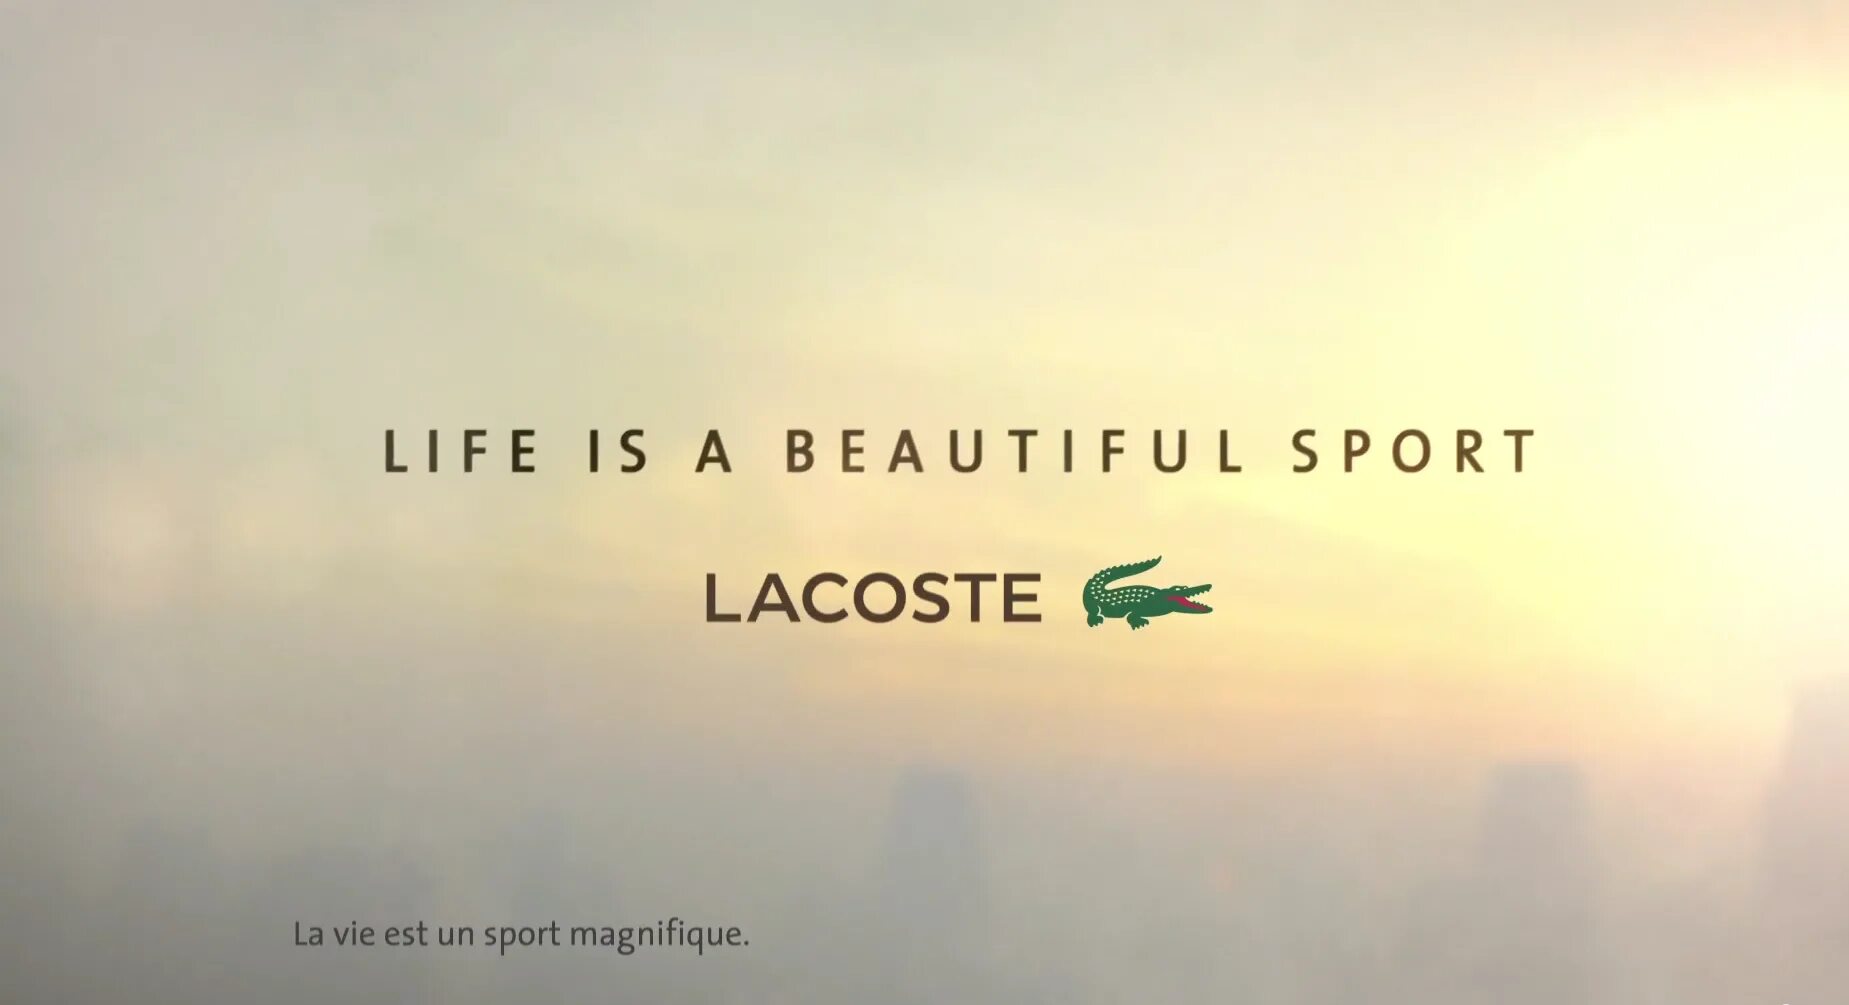 Life is a value. Слоган лакост. Life is beautiful Sport Lacoste. Лакост лакост лайф. Lacoste реклама.